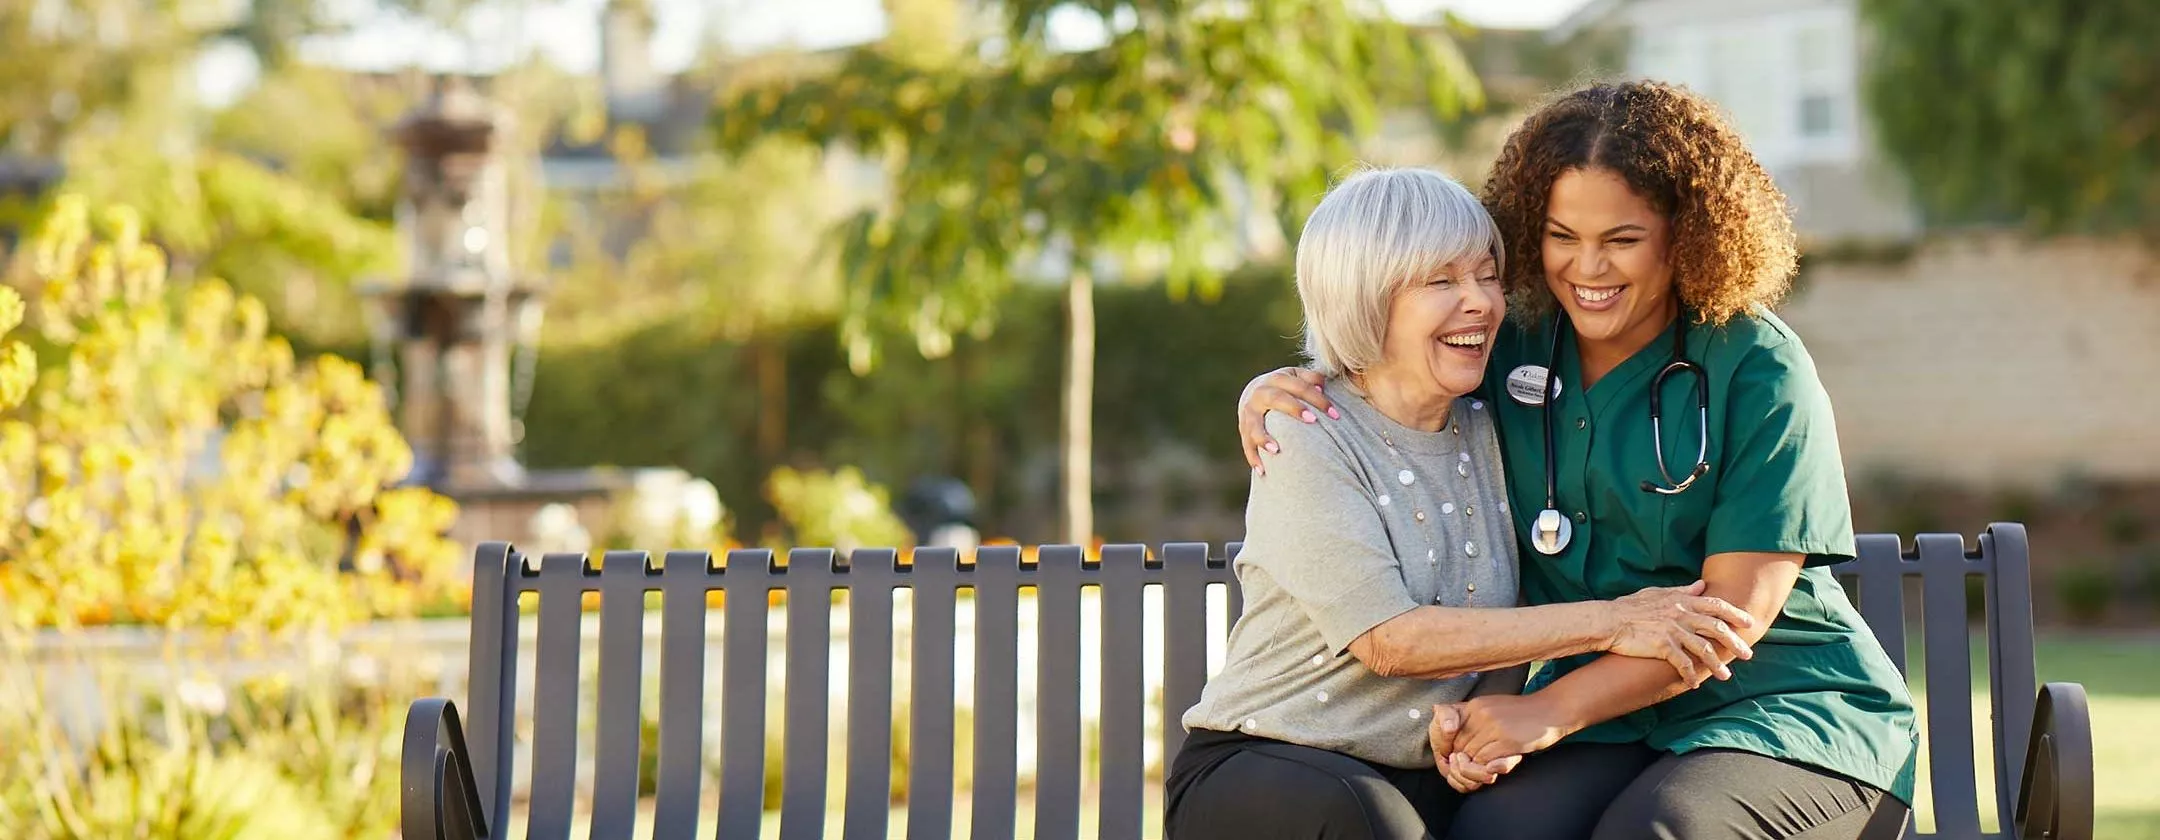 Caregiver is laughing with the senior lady on a bench